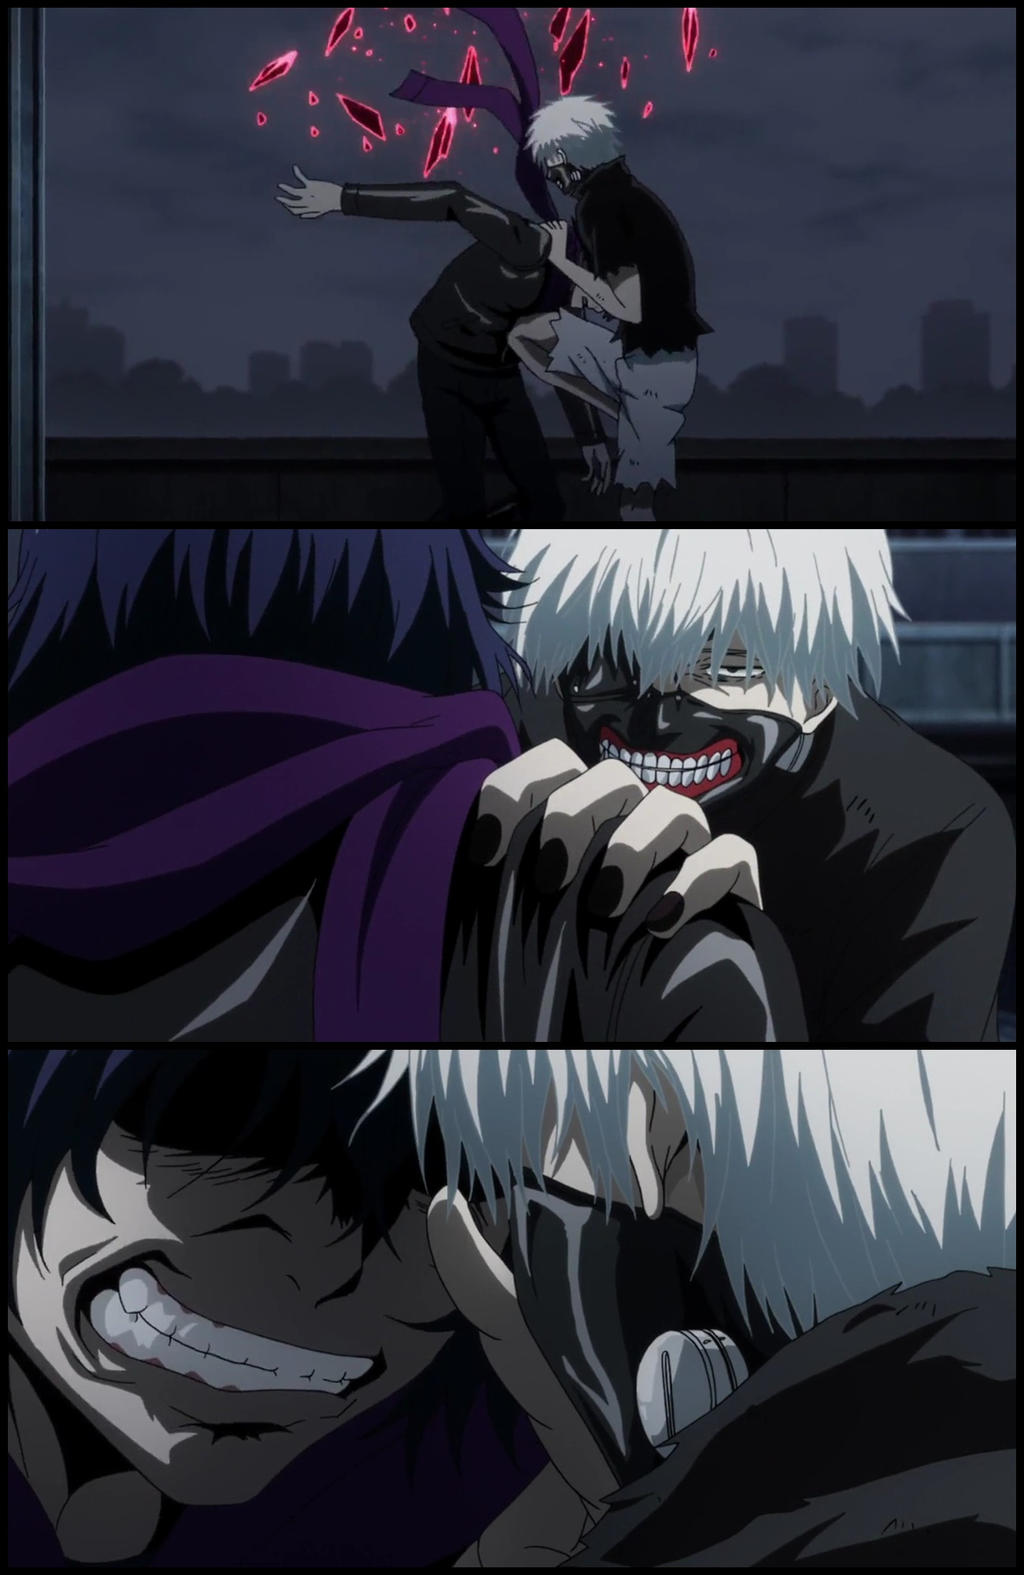 Tokyo Ghoul Sezonul 2 Ep 1 Rosub Tokyo Ghoul Season 2 Episode 1 - Page1 by ng9 on DeviantArt